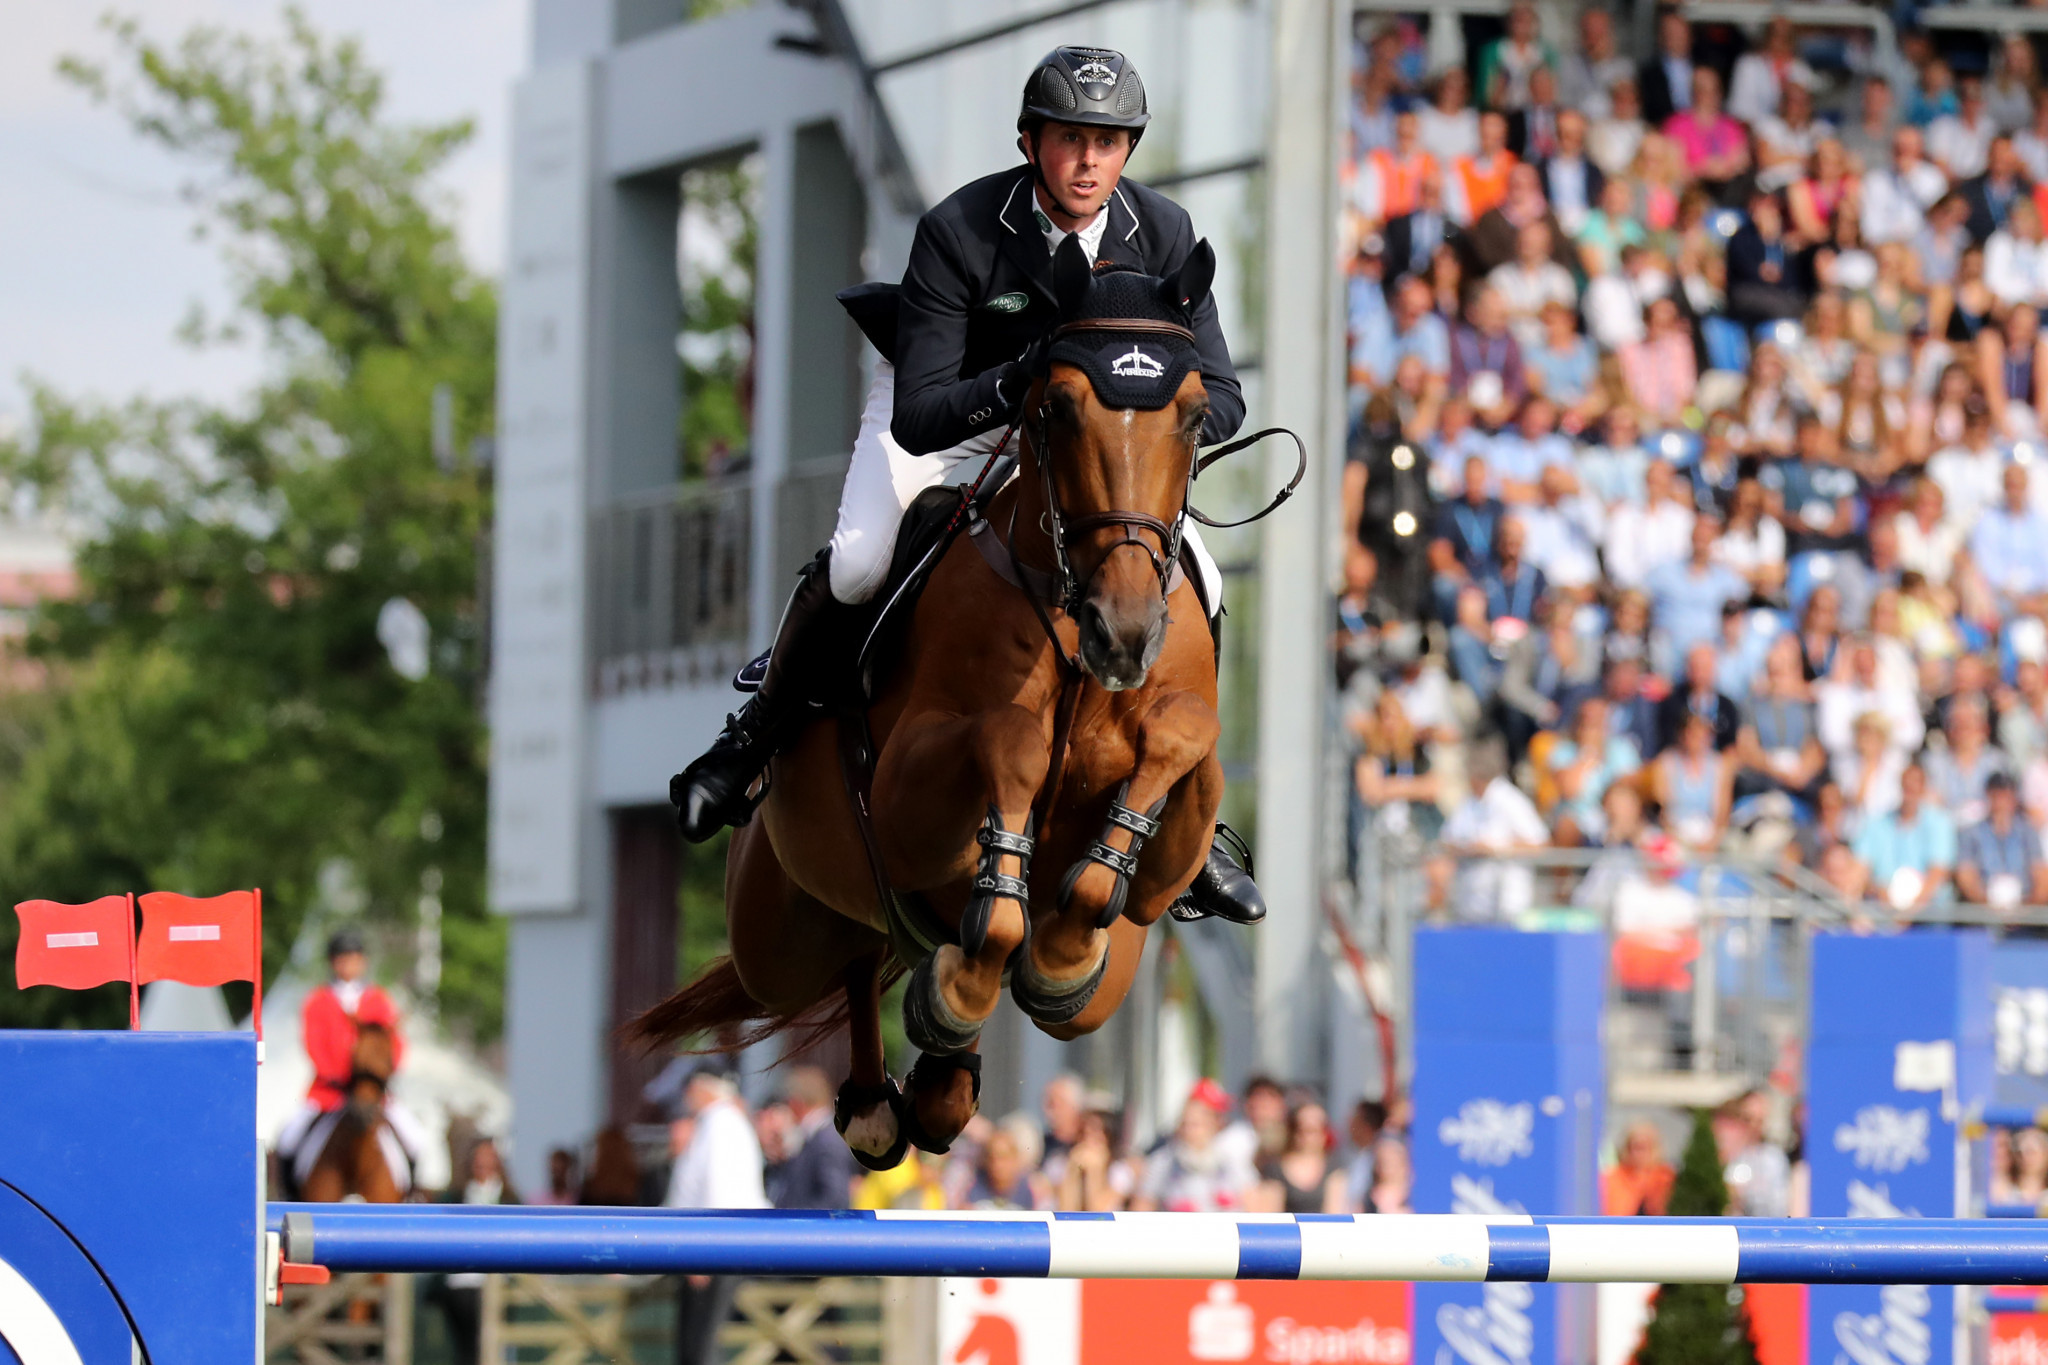 British riders promise strong challenge to Global Champions Tour leader Devos in London